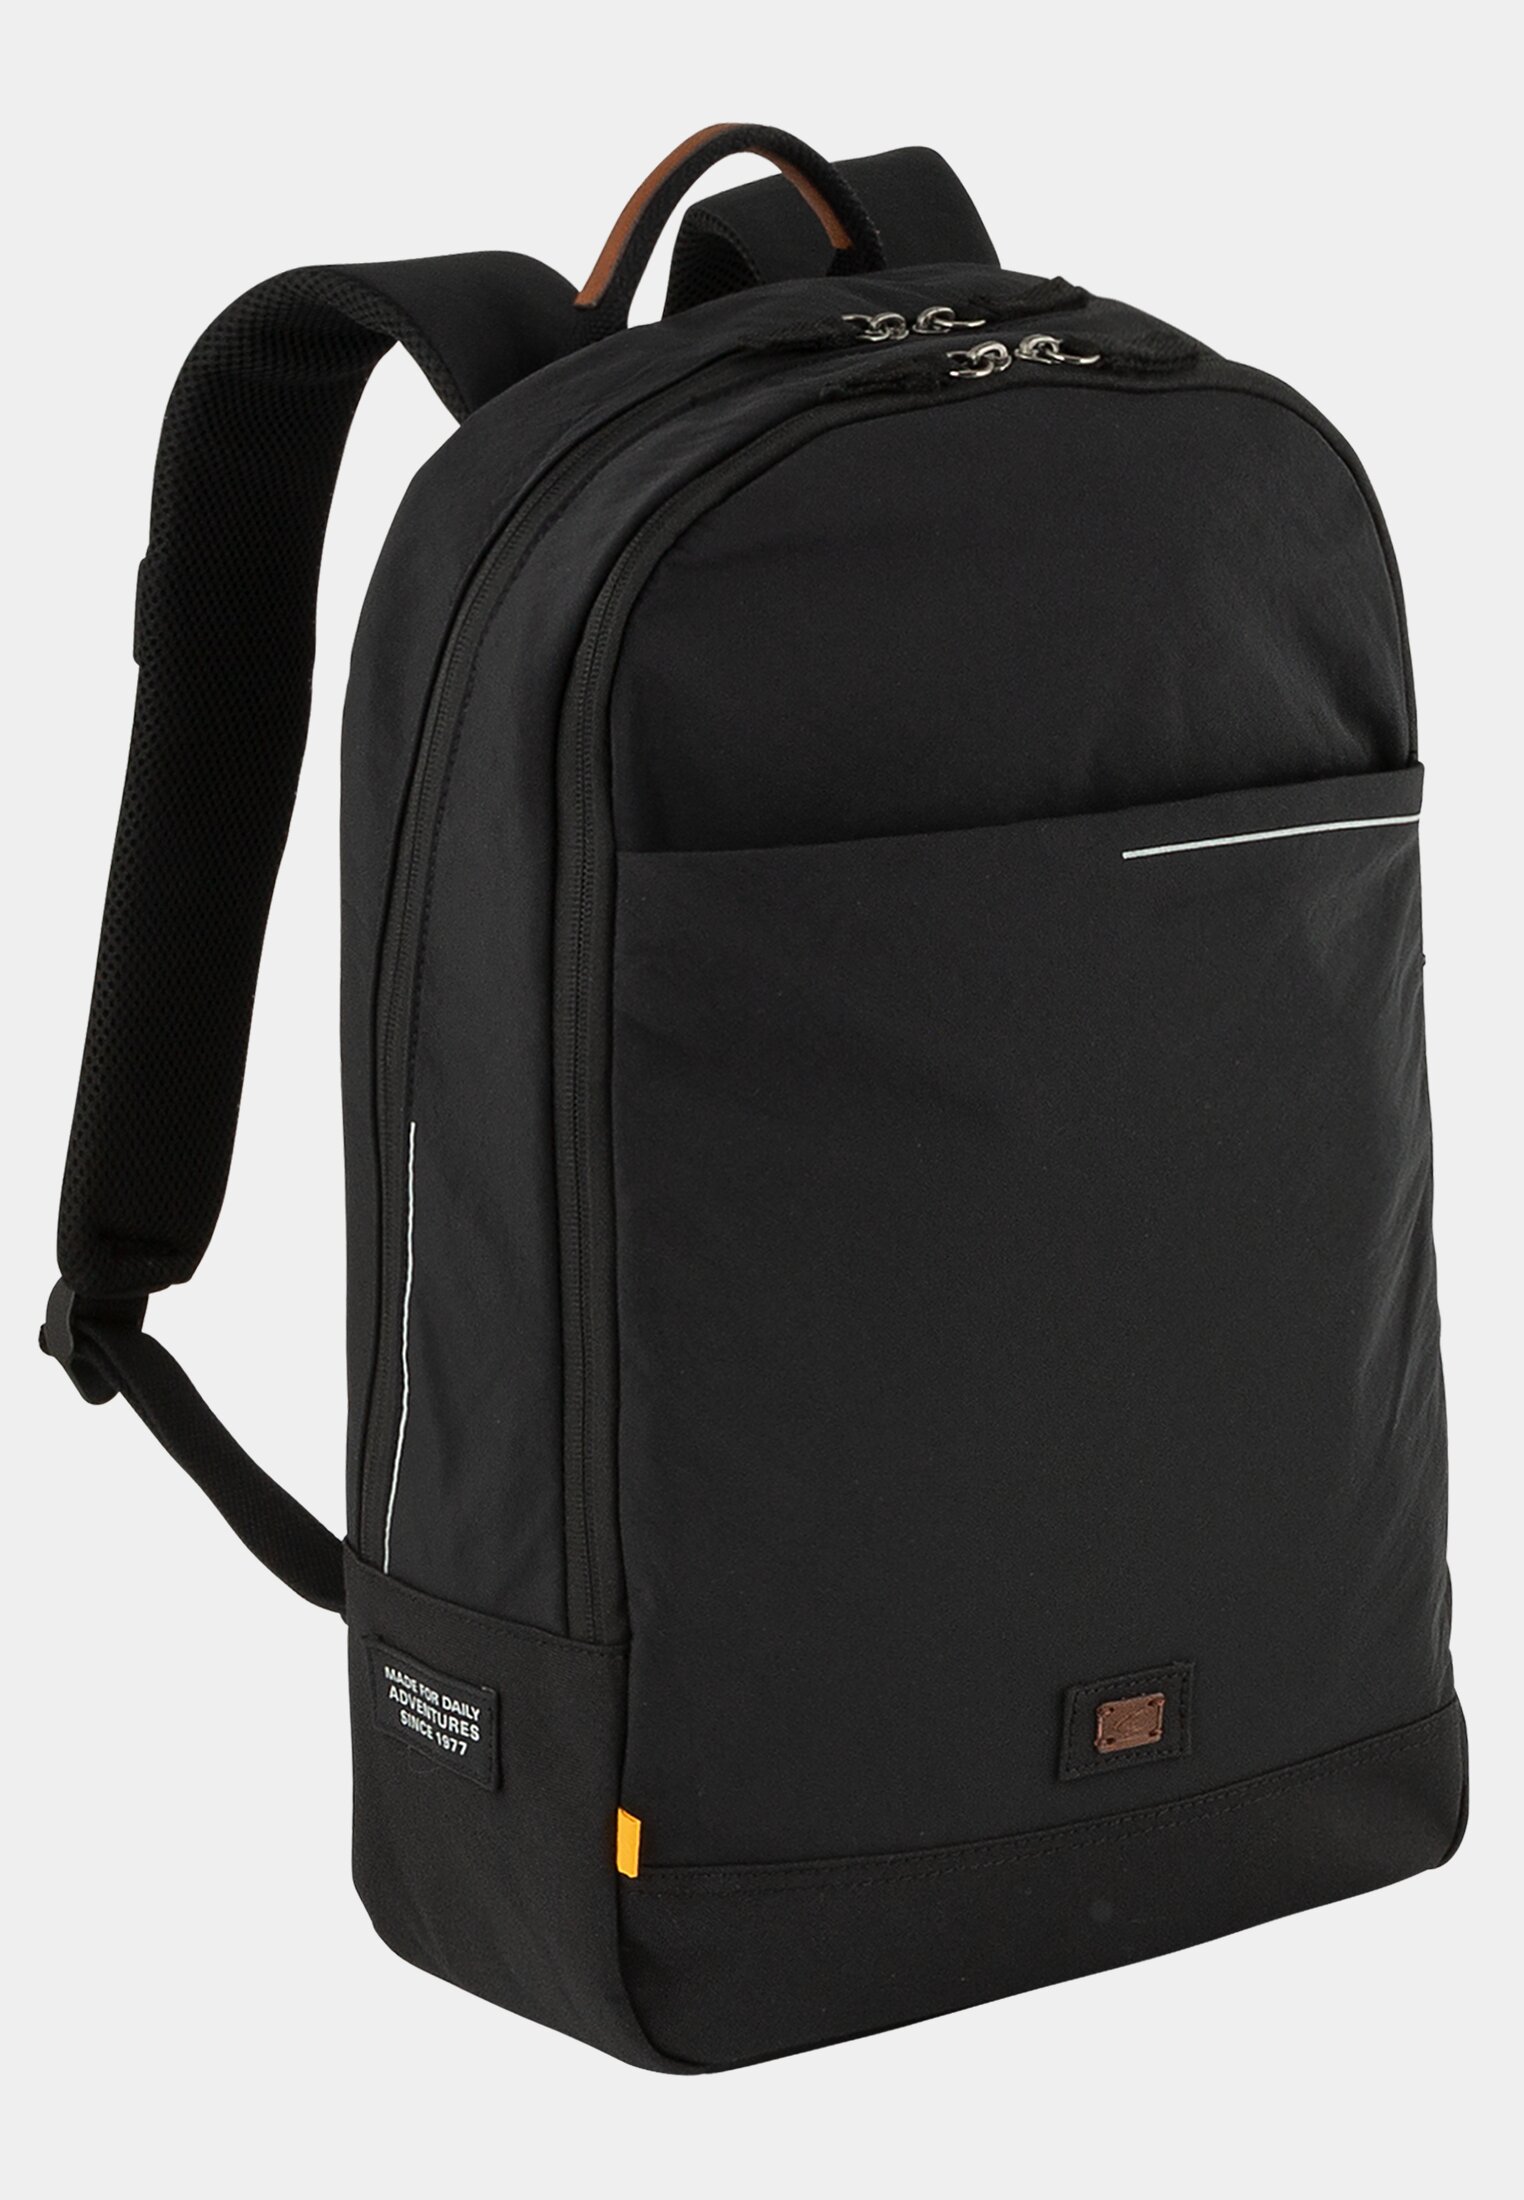 Camel Active Backpack with reflective detail stripes